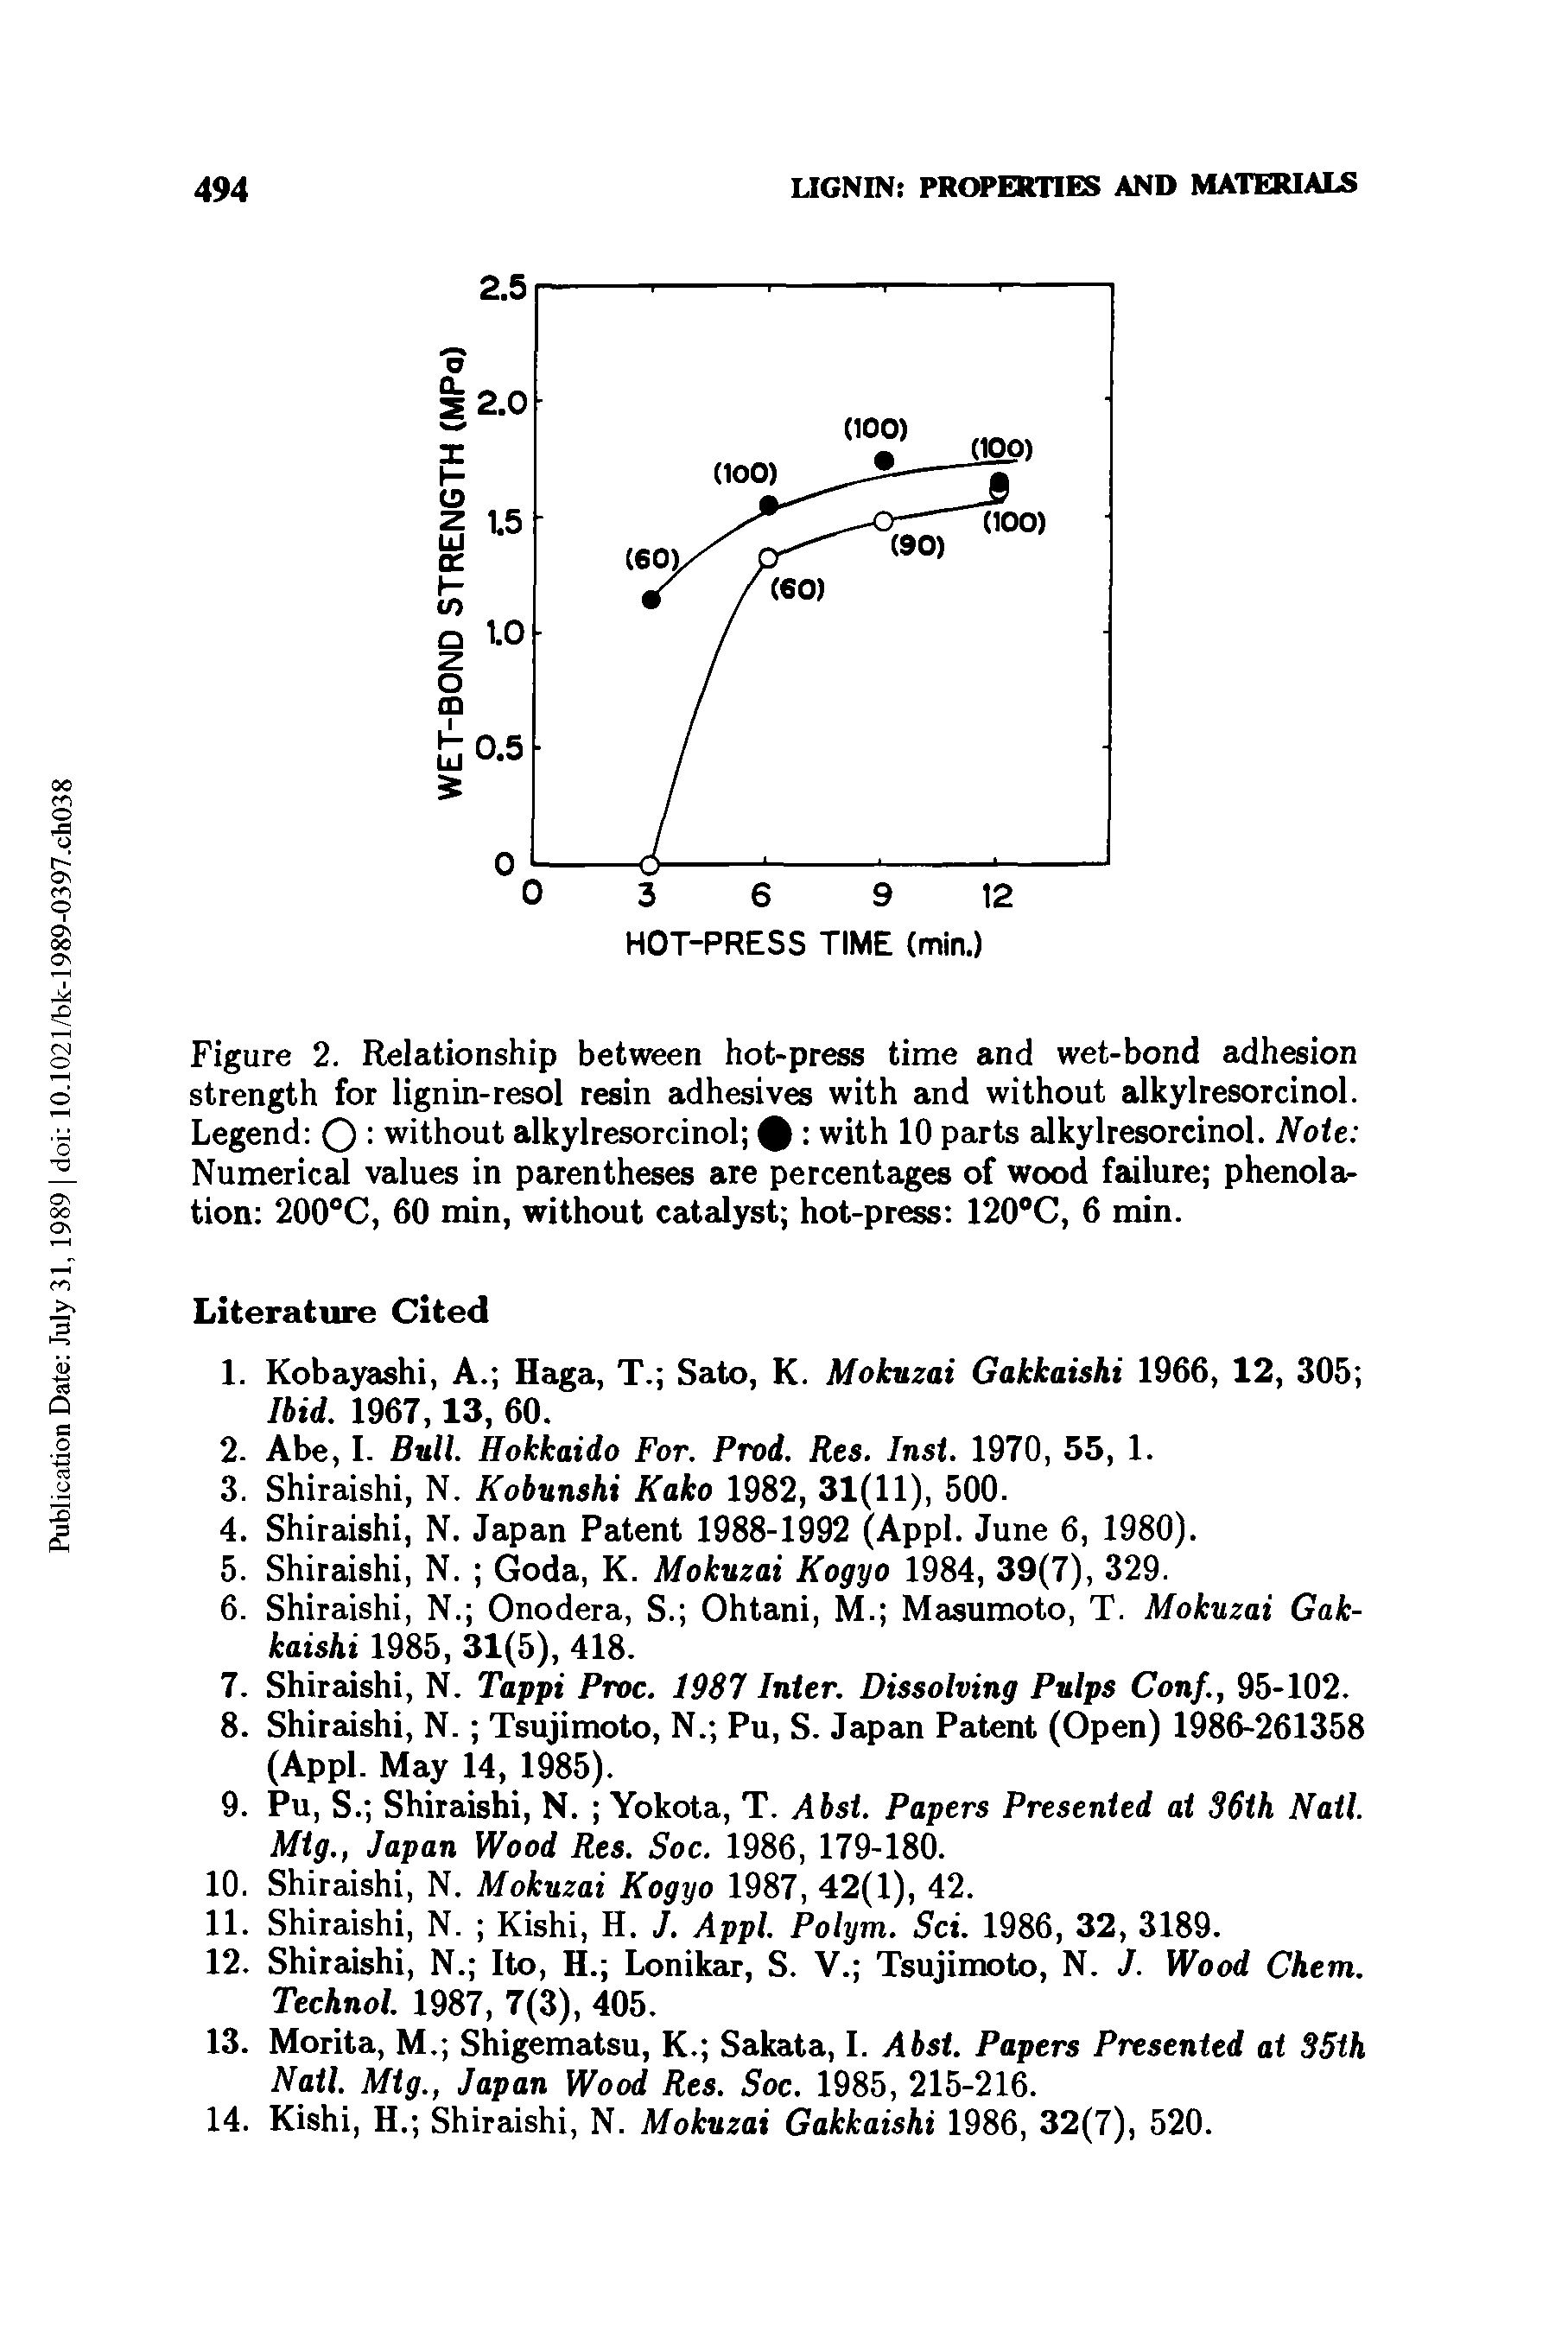 Figure 2. Relationship between hot-press time and wet-bond adhesion strength for lignin-resol resin adhesives with and without alkylresorcinol. Legend Q without alkylresorcinol 0 with 10 parts alkylresorcinol. Note Numerical values in parentheses are percentages of wood failure phenola-tion 200°C, 60 min, without catalyst hot-press 120°C, 6 min.